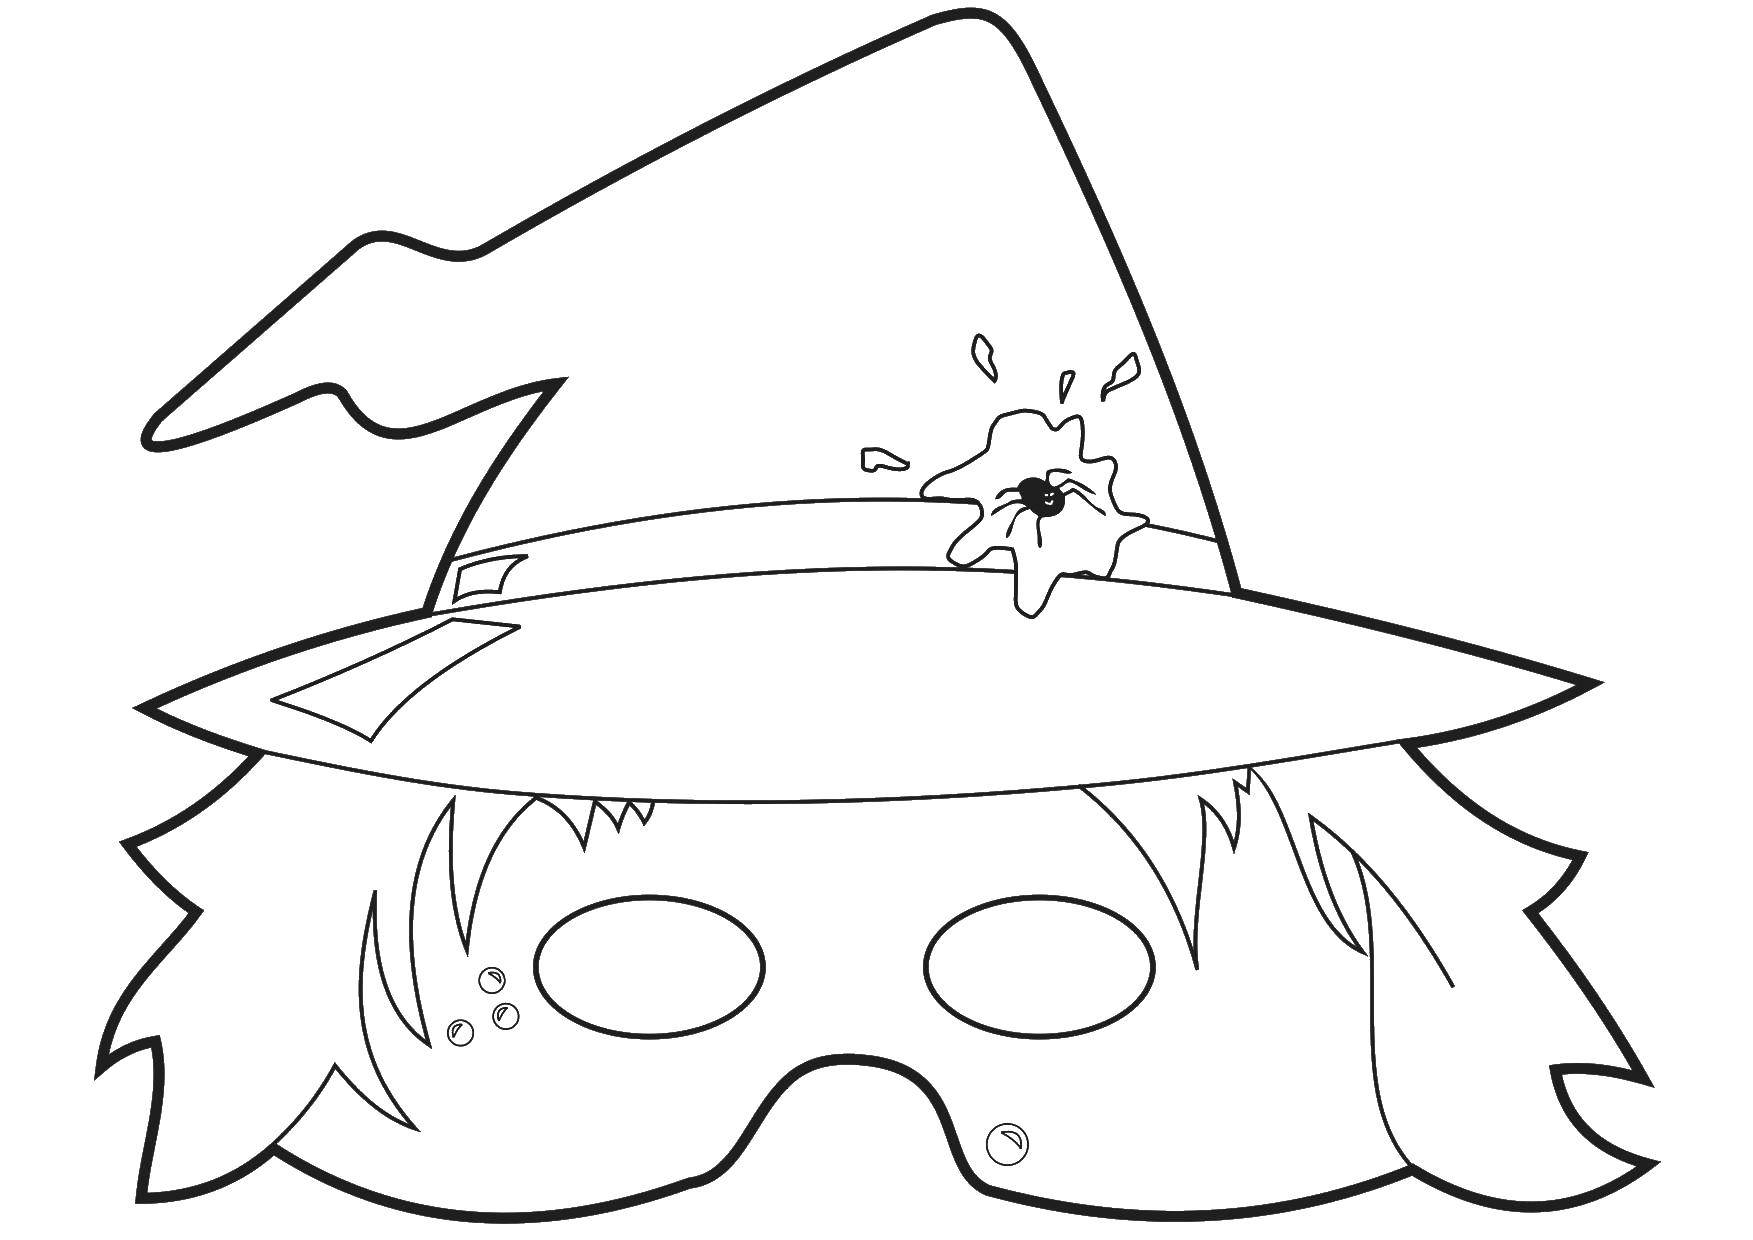 Coloring Mask witch. Category witch. Tags:  witch, Halloween.